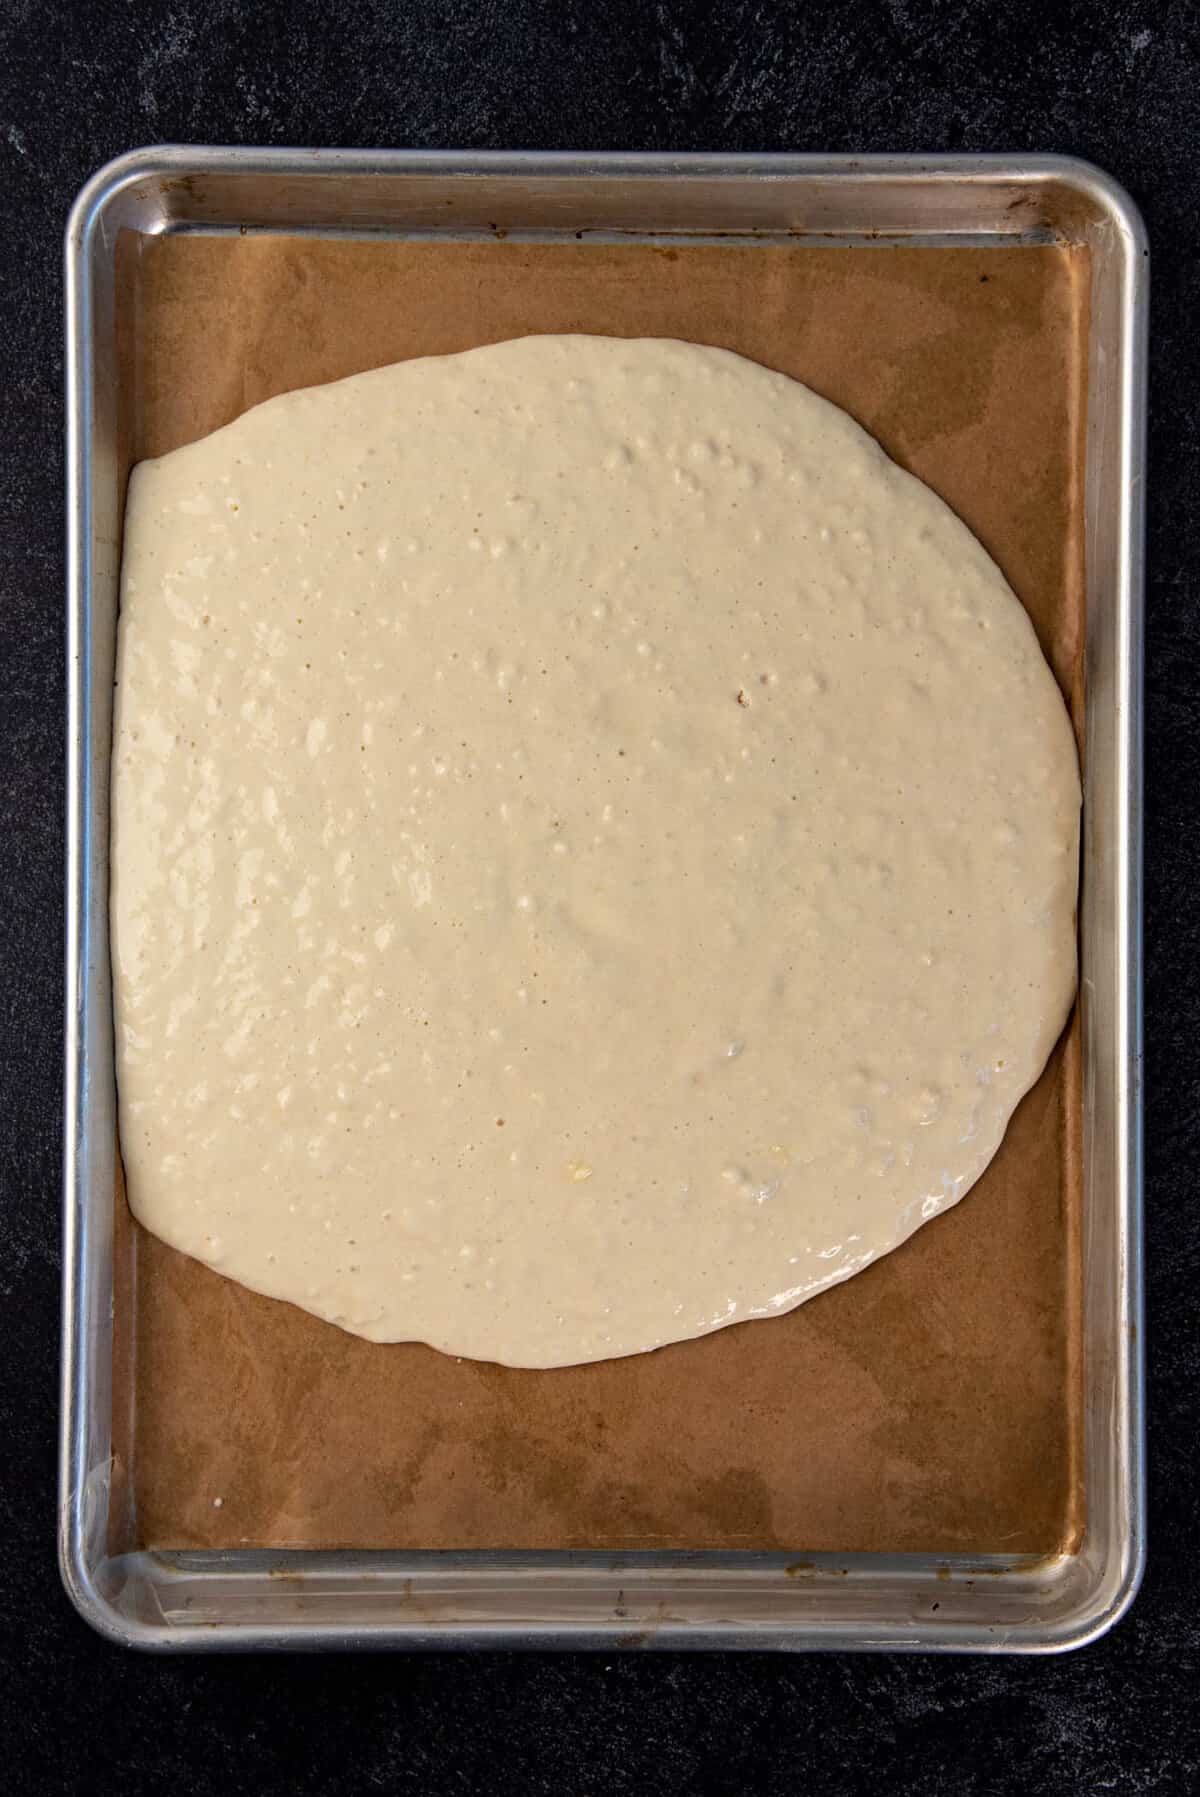 The pancake batter poured into the center of the prepared half sheet pan.